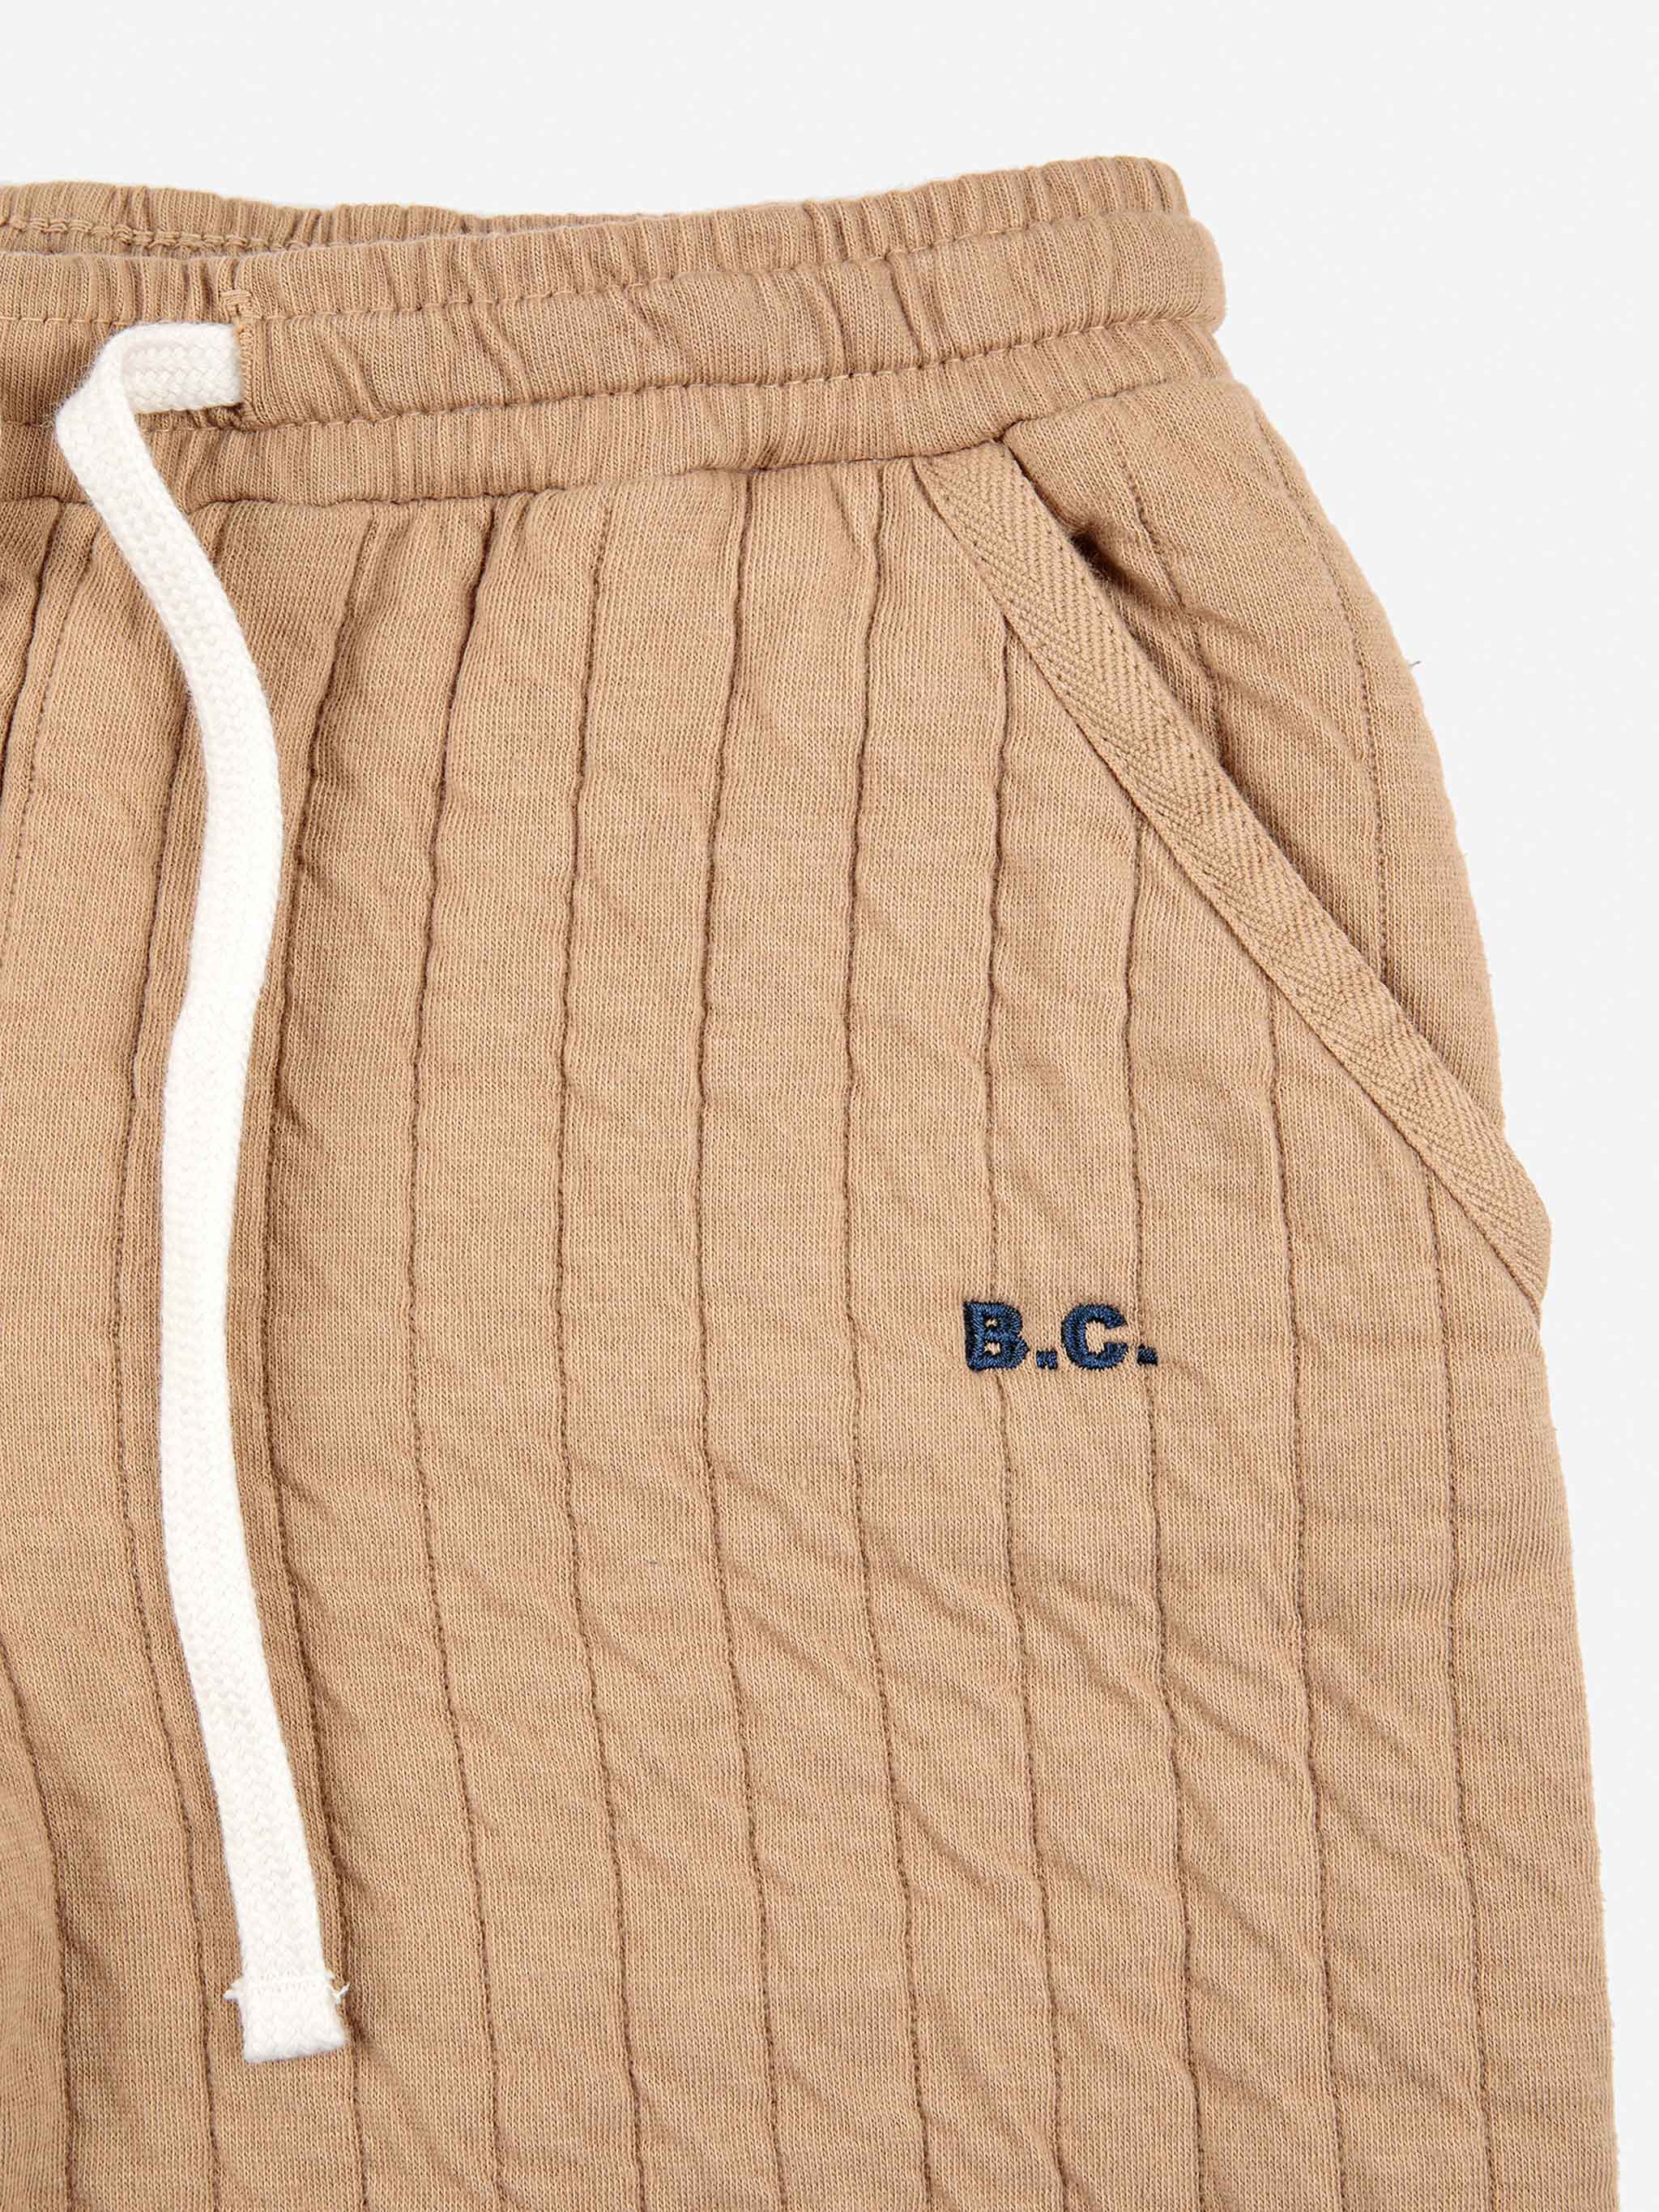 B.C quilted jogging pants - 2-3Y